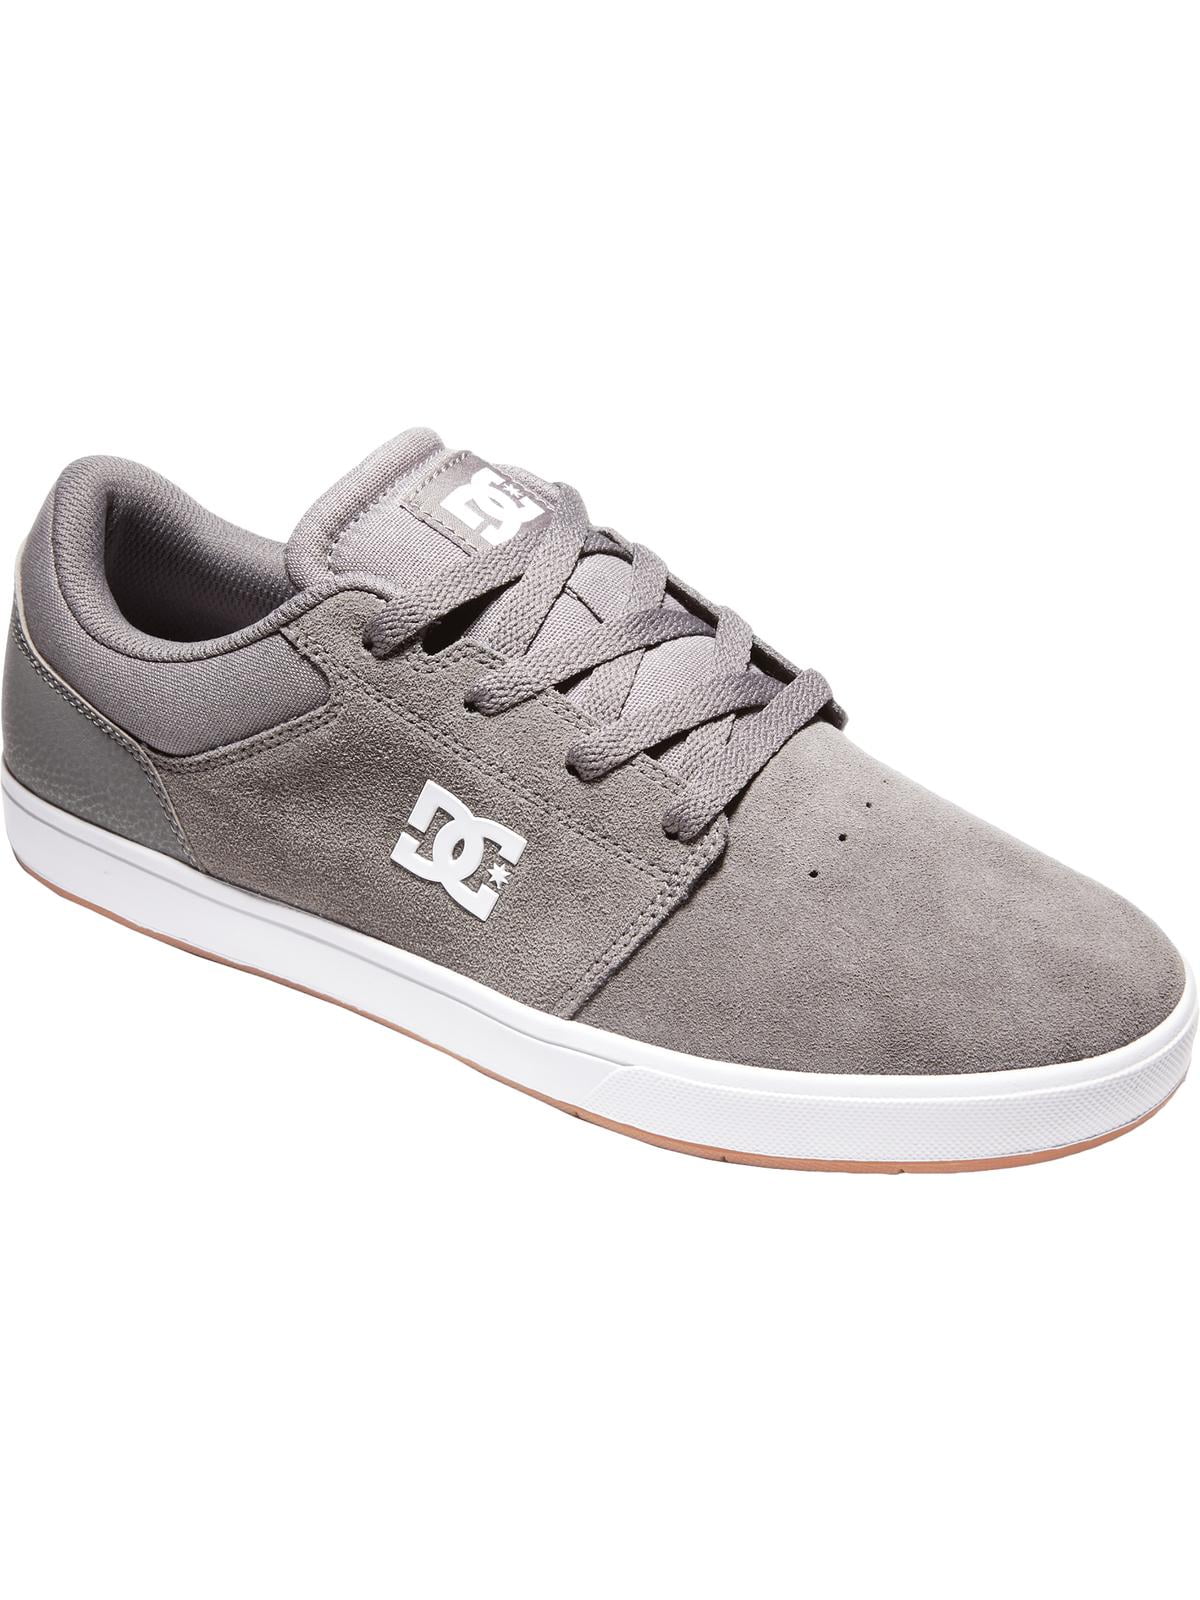 DC Central Mens Grey Leather Lace Up Skate Shoes Trainers Size 8-13 